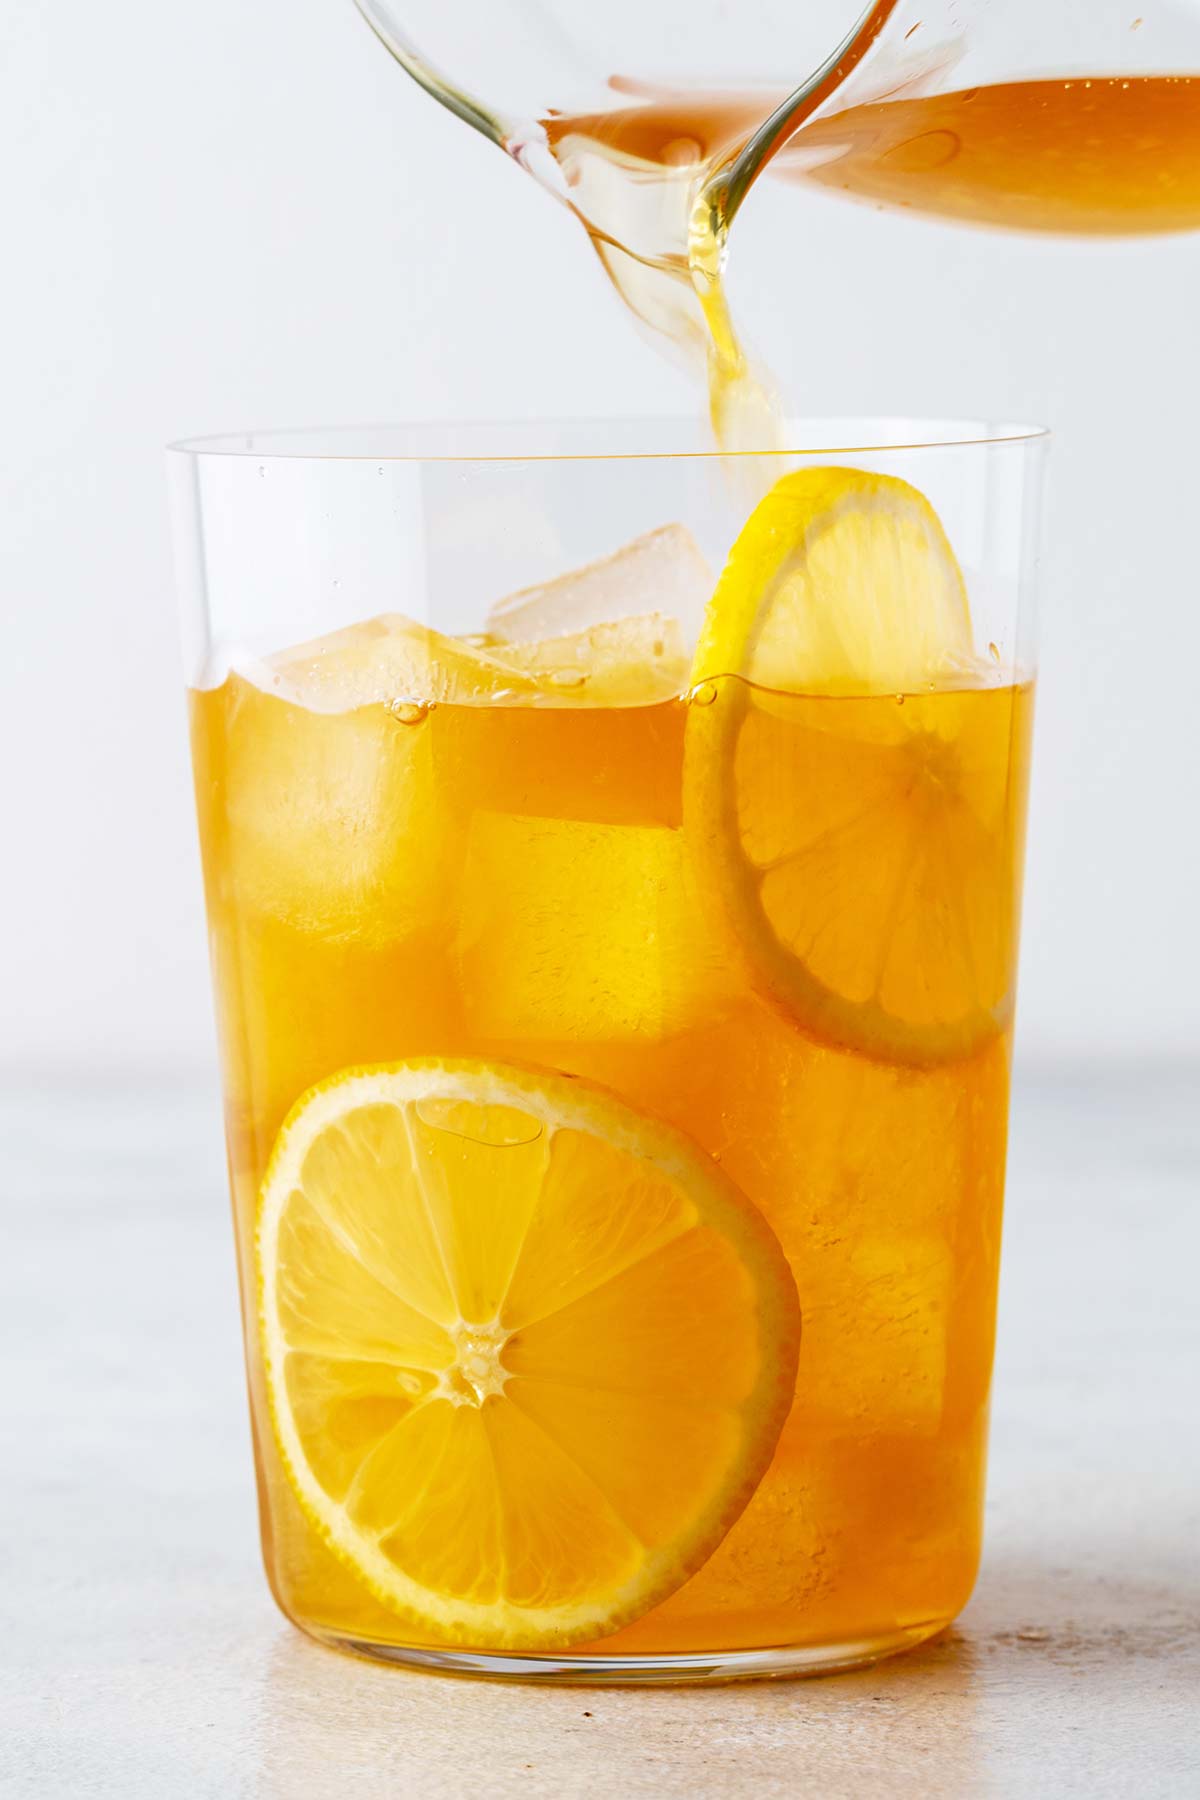 Lemon Iced Tea being poured into clear glass.